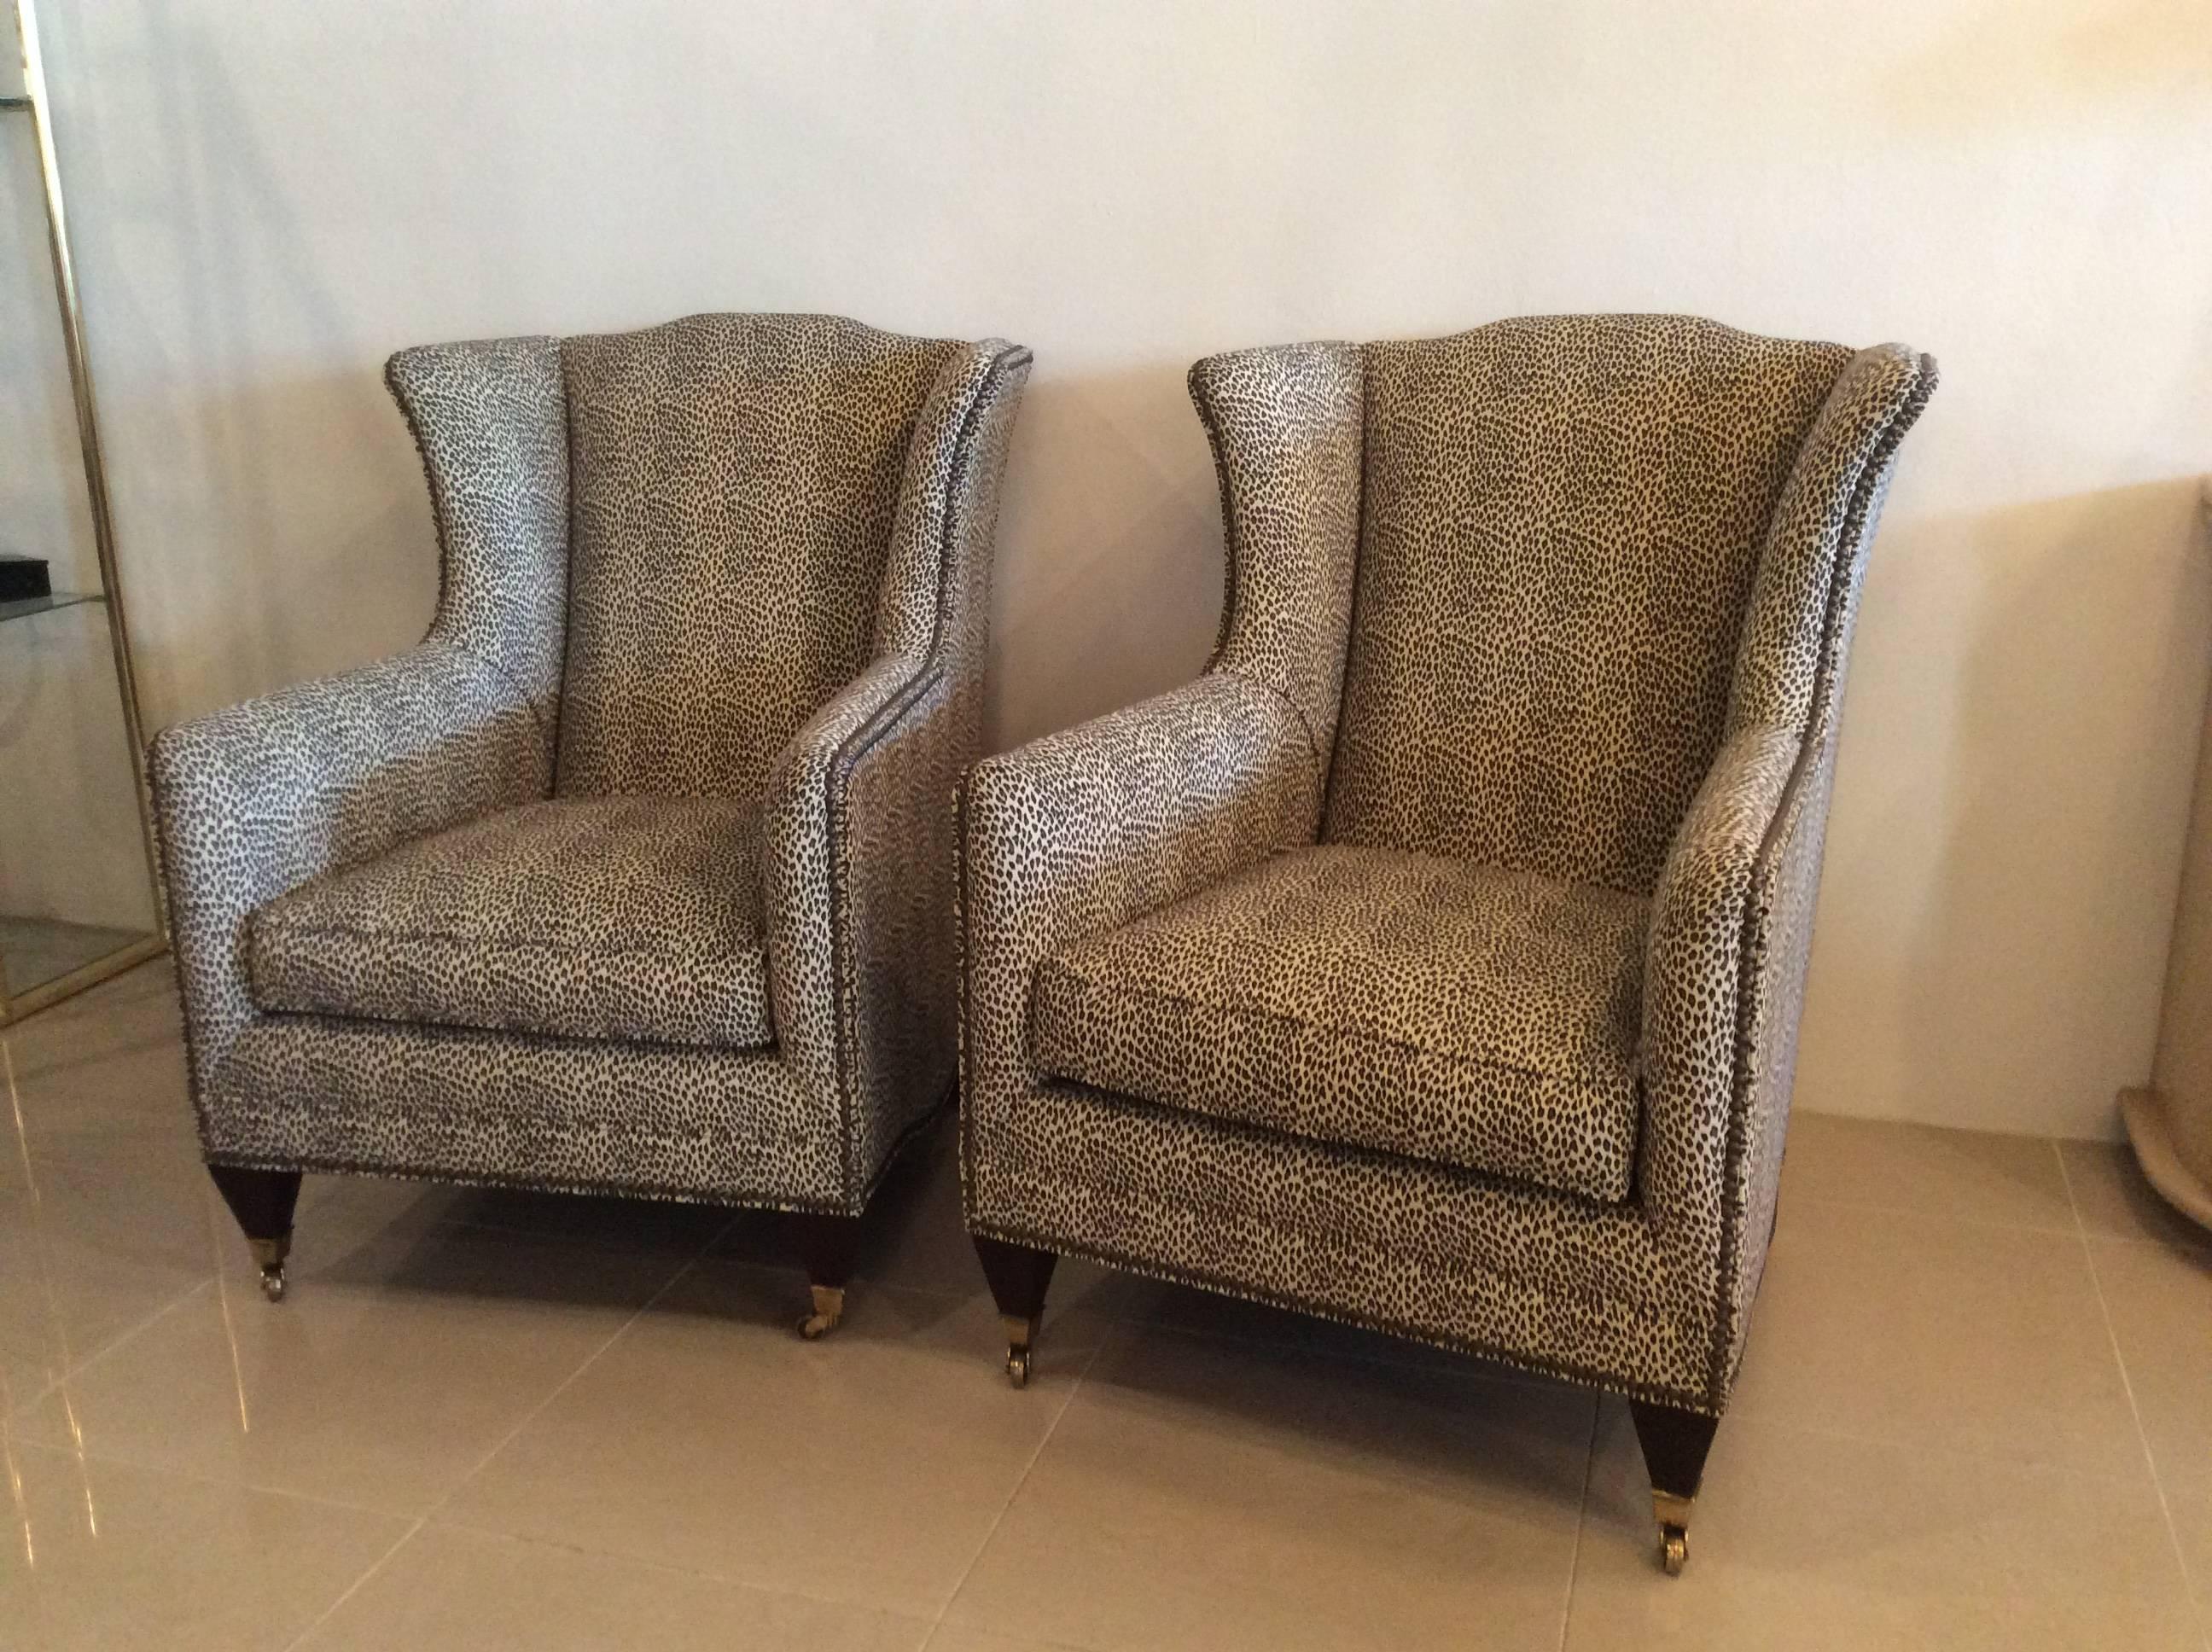 Amazing pair of vintage wingback arm chairs, club, lounge by Henredon Acquisitions (tagged). Done in a fabulous custom animal print fabric with brass nailheads, wood feet with brass caps and castors. These chairs are in new condition and super